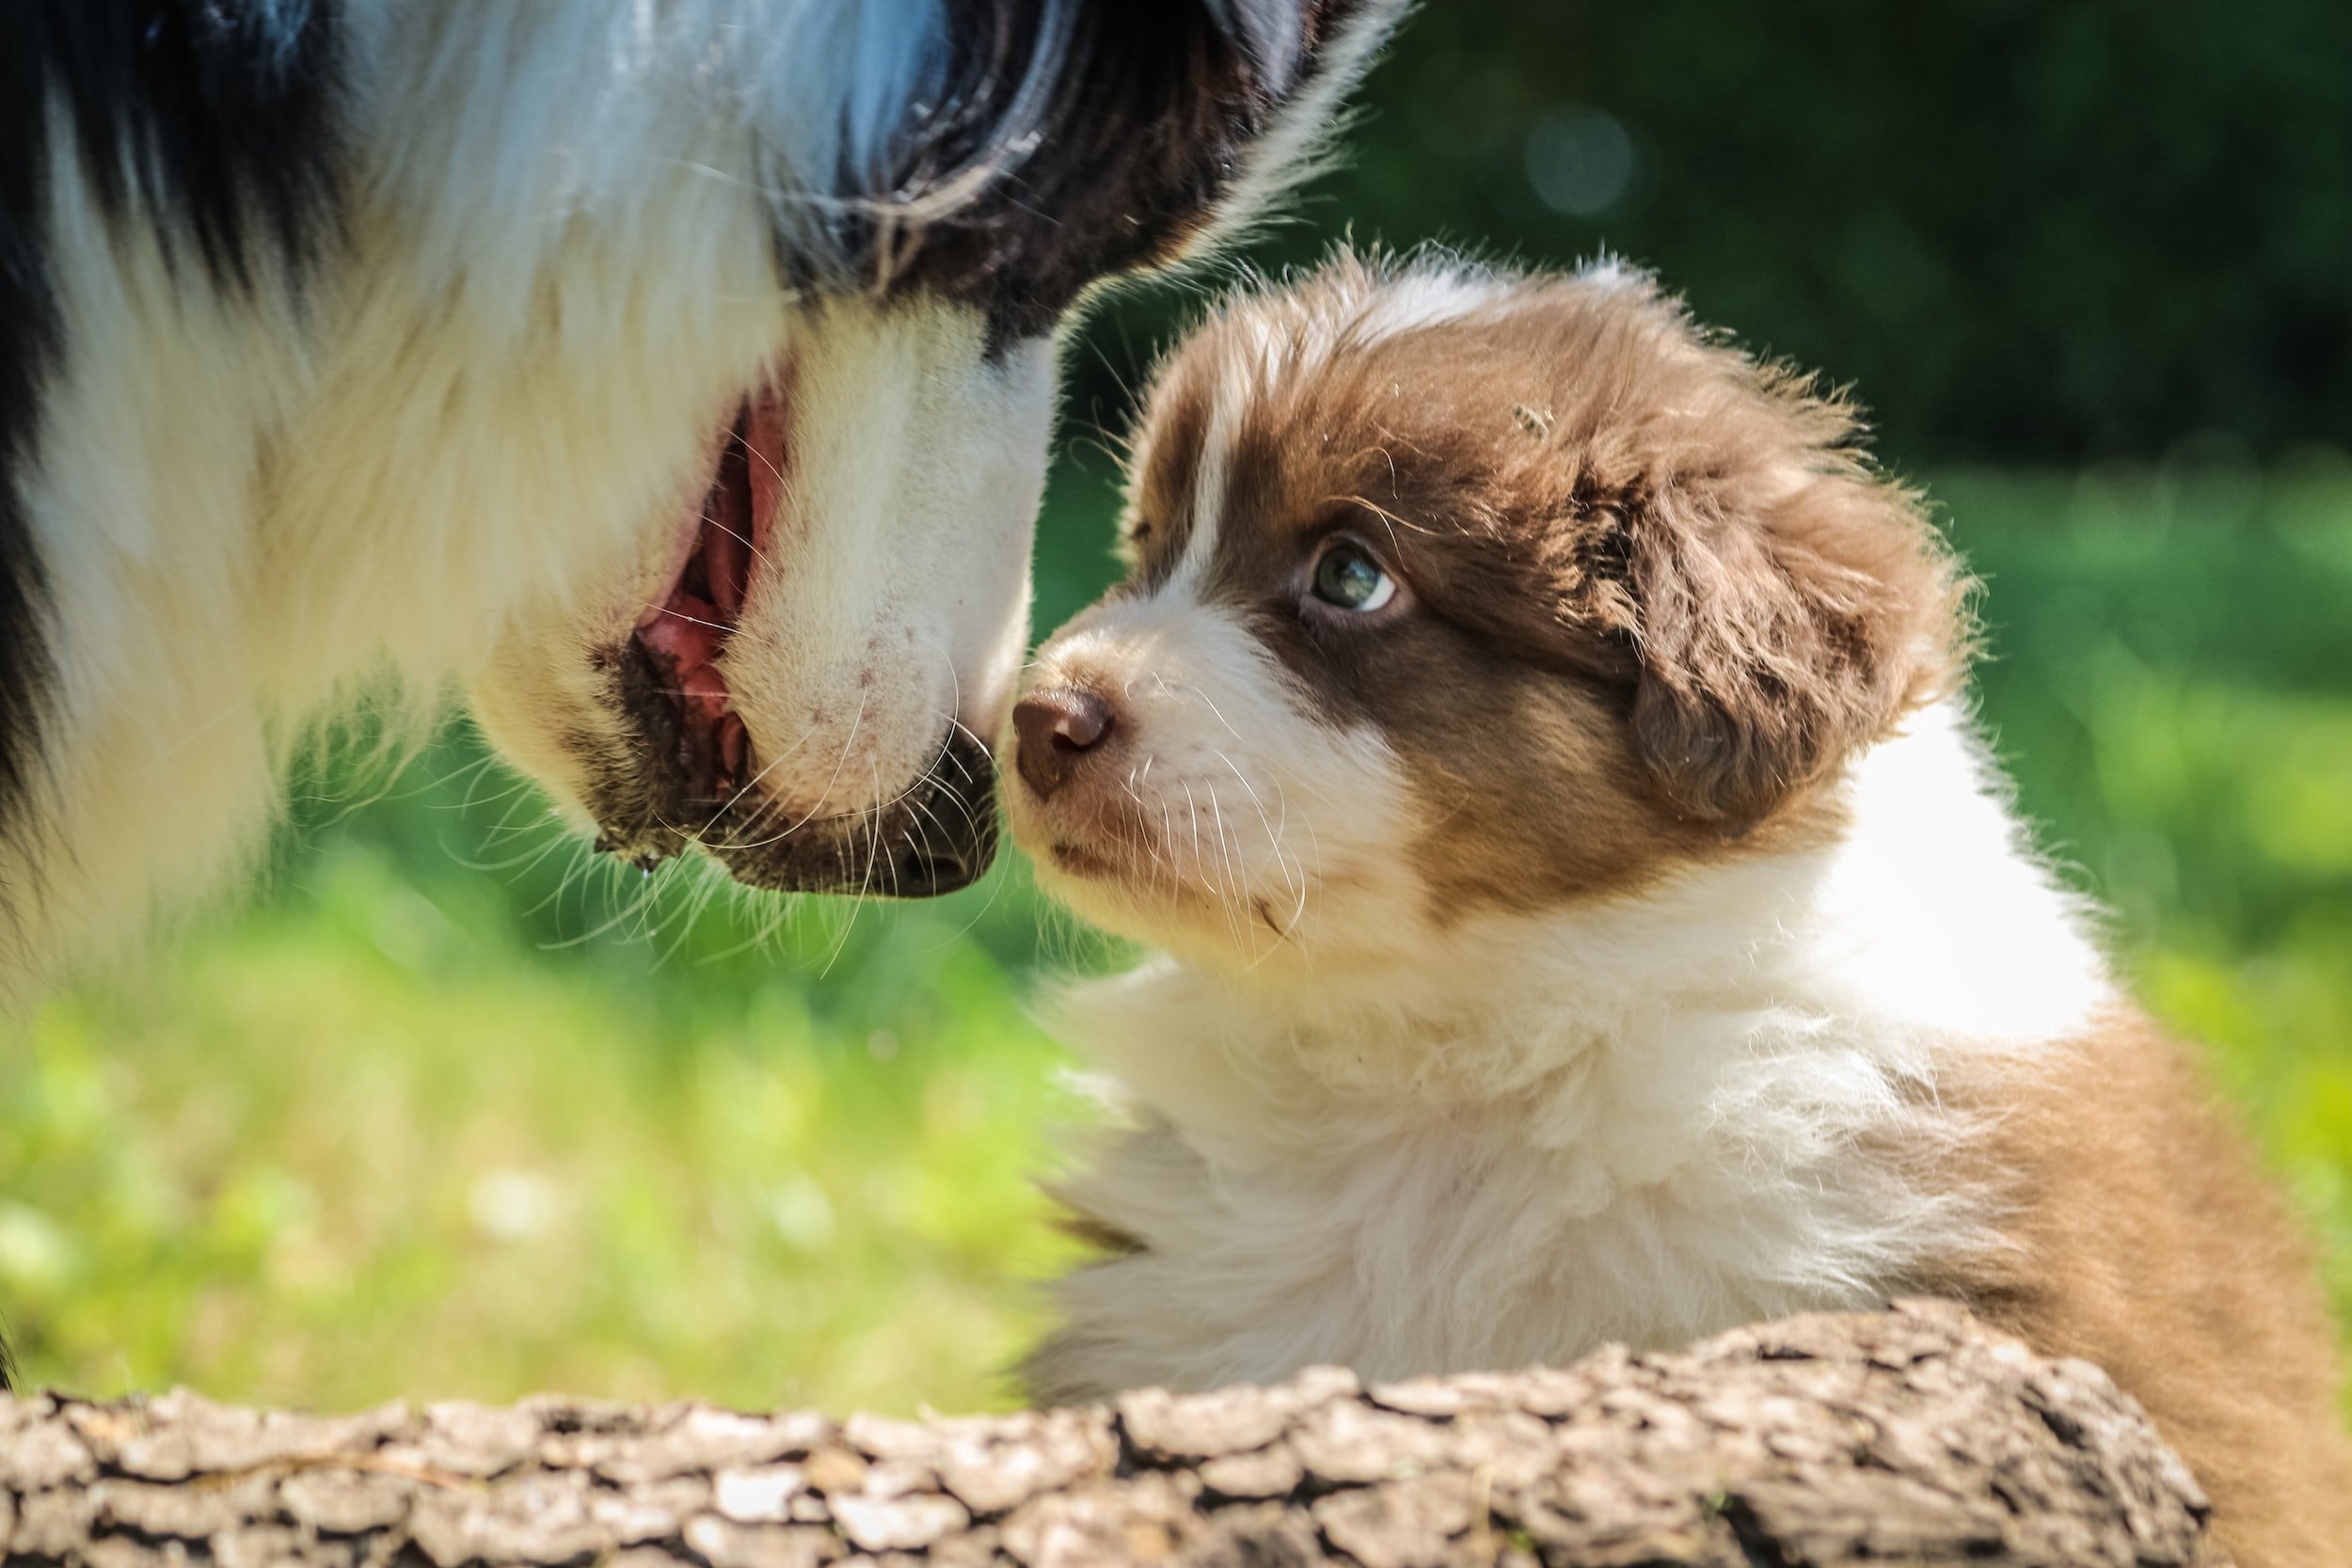 17 Fun Facts About Puppies for National Puppy Day